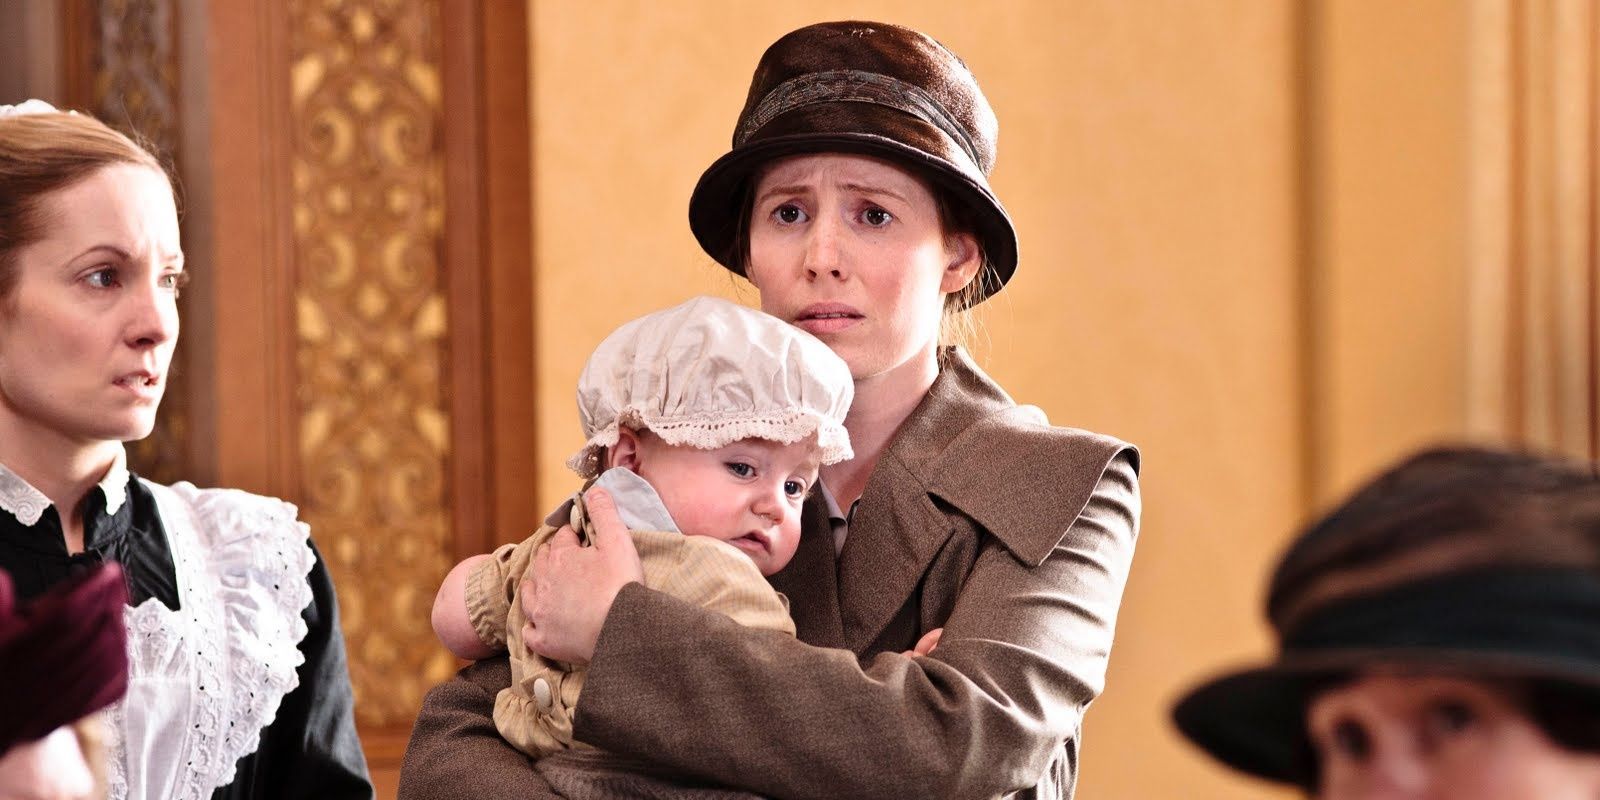 Ethel with Her Child in Downton abbey.,